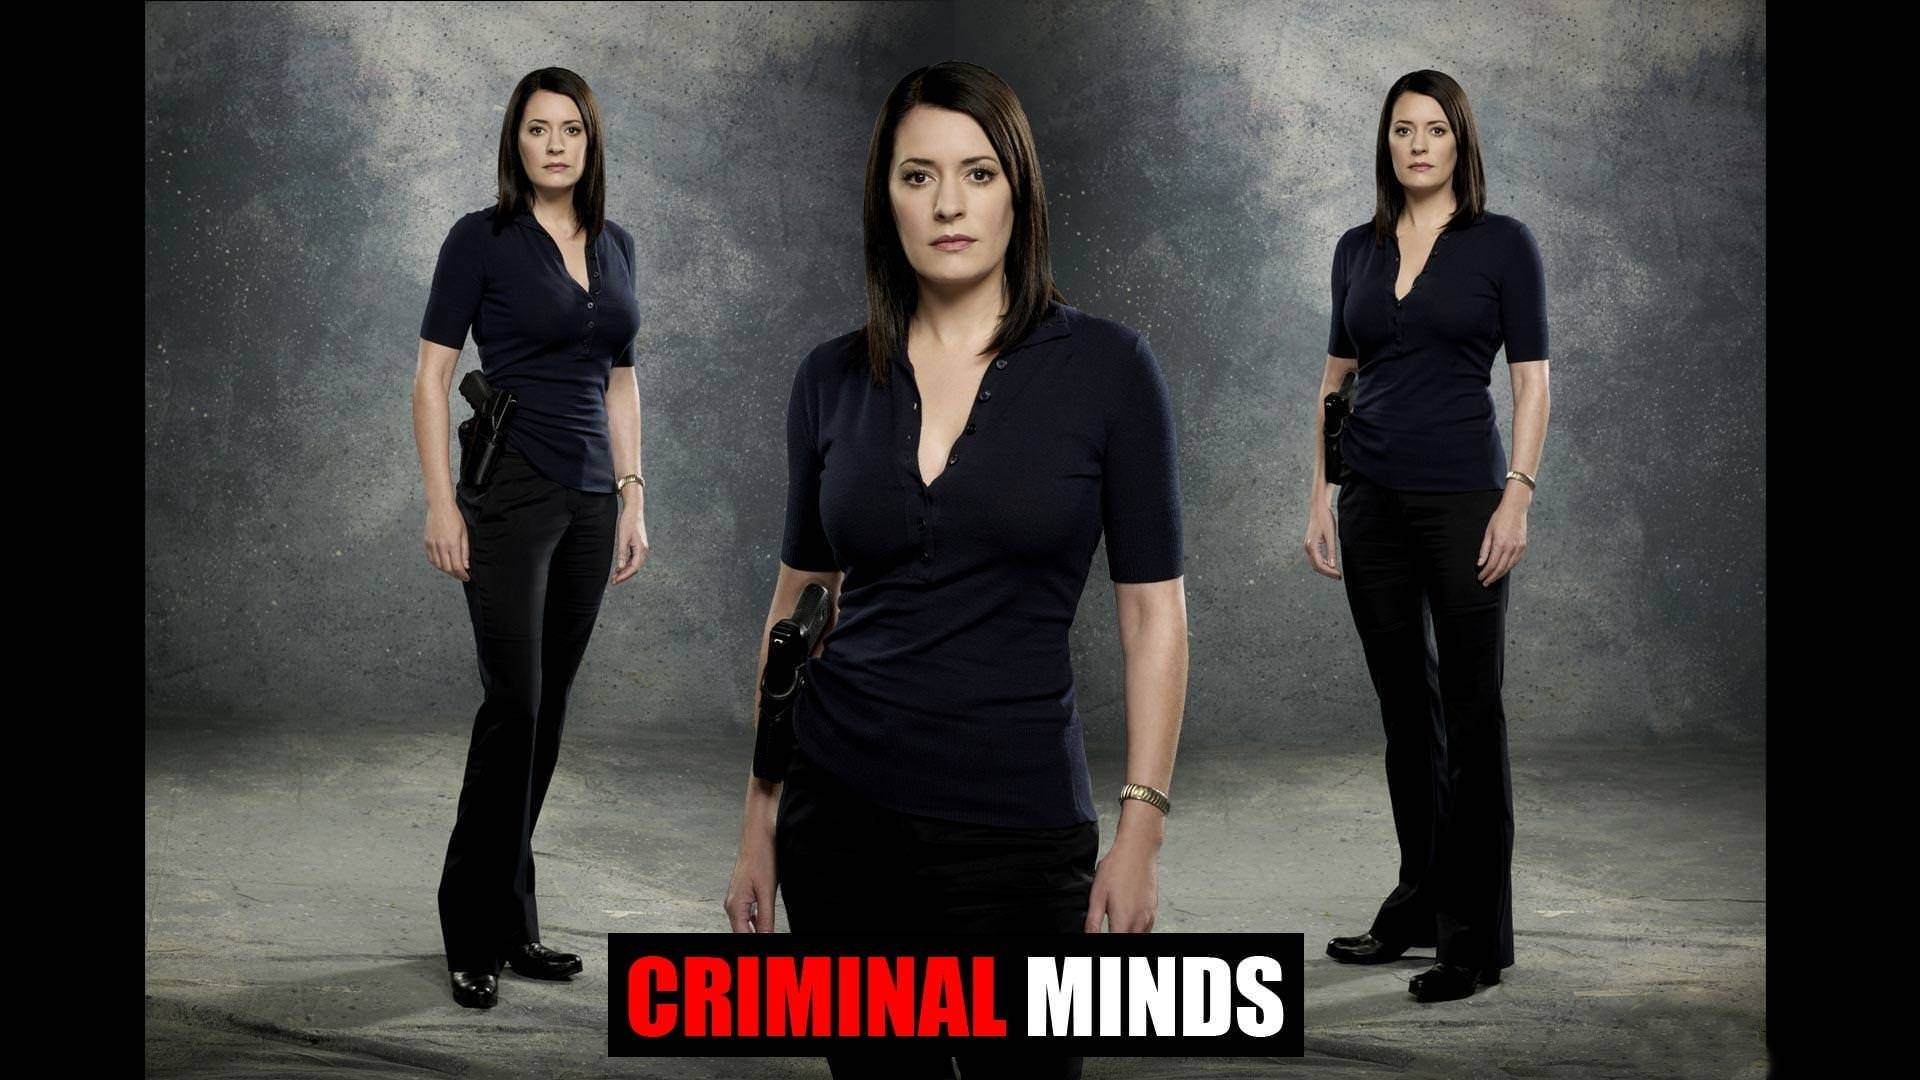 Emily Prentiss From Criminal Minds Show Background